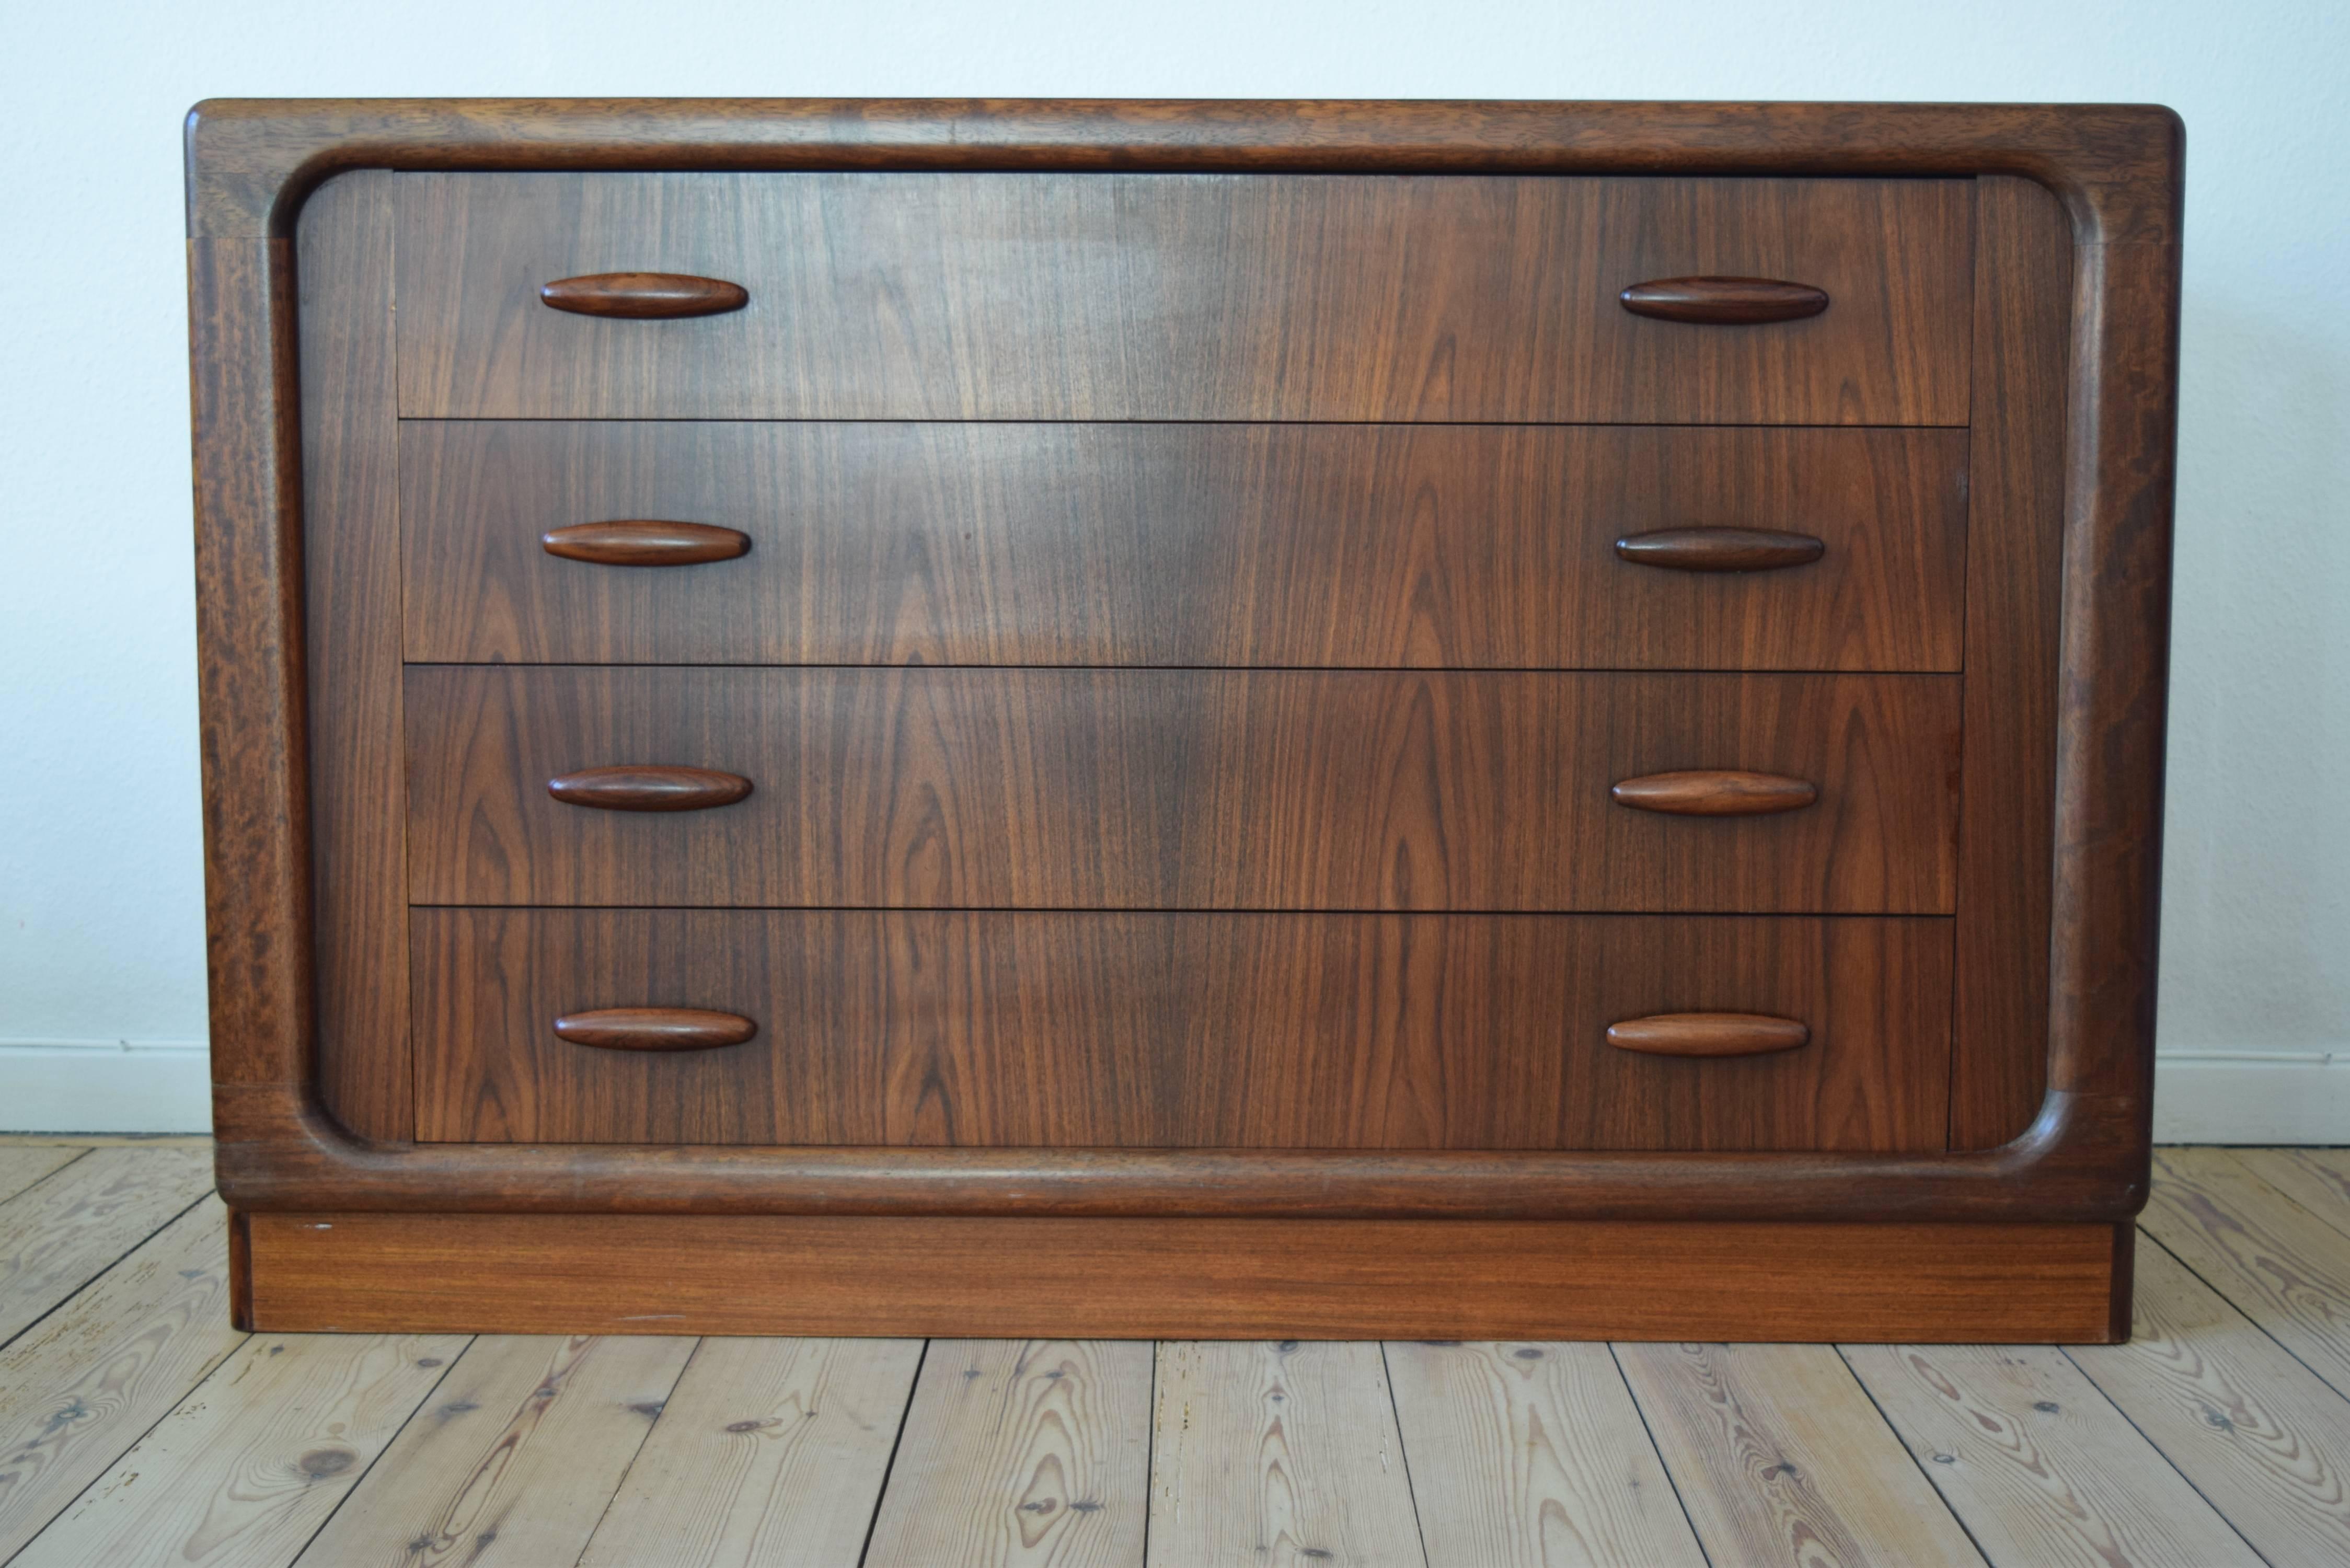 This large rosewood chest was manufactured by Dyrlund in the 1960s. This piece features four drawers with sculpted rosewood drawer pulls. The four drawers have a solid teak interior as does the interior of the chest. Bevelled front edge. The weight